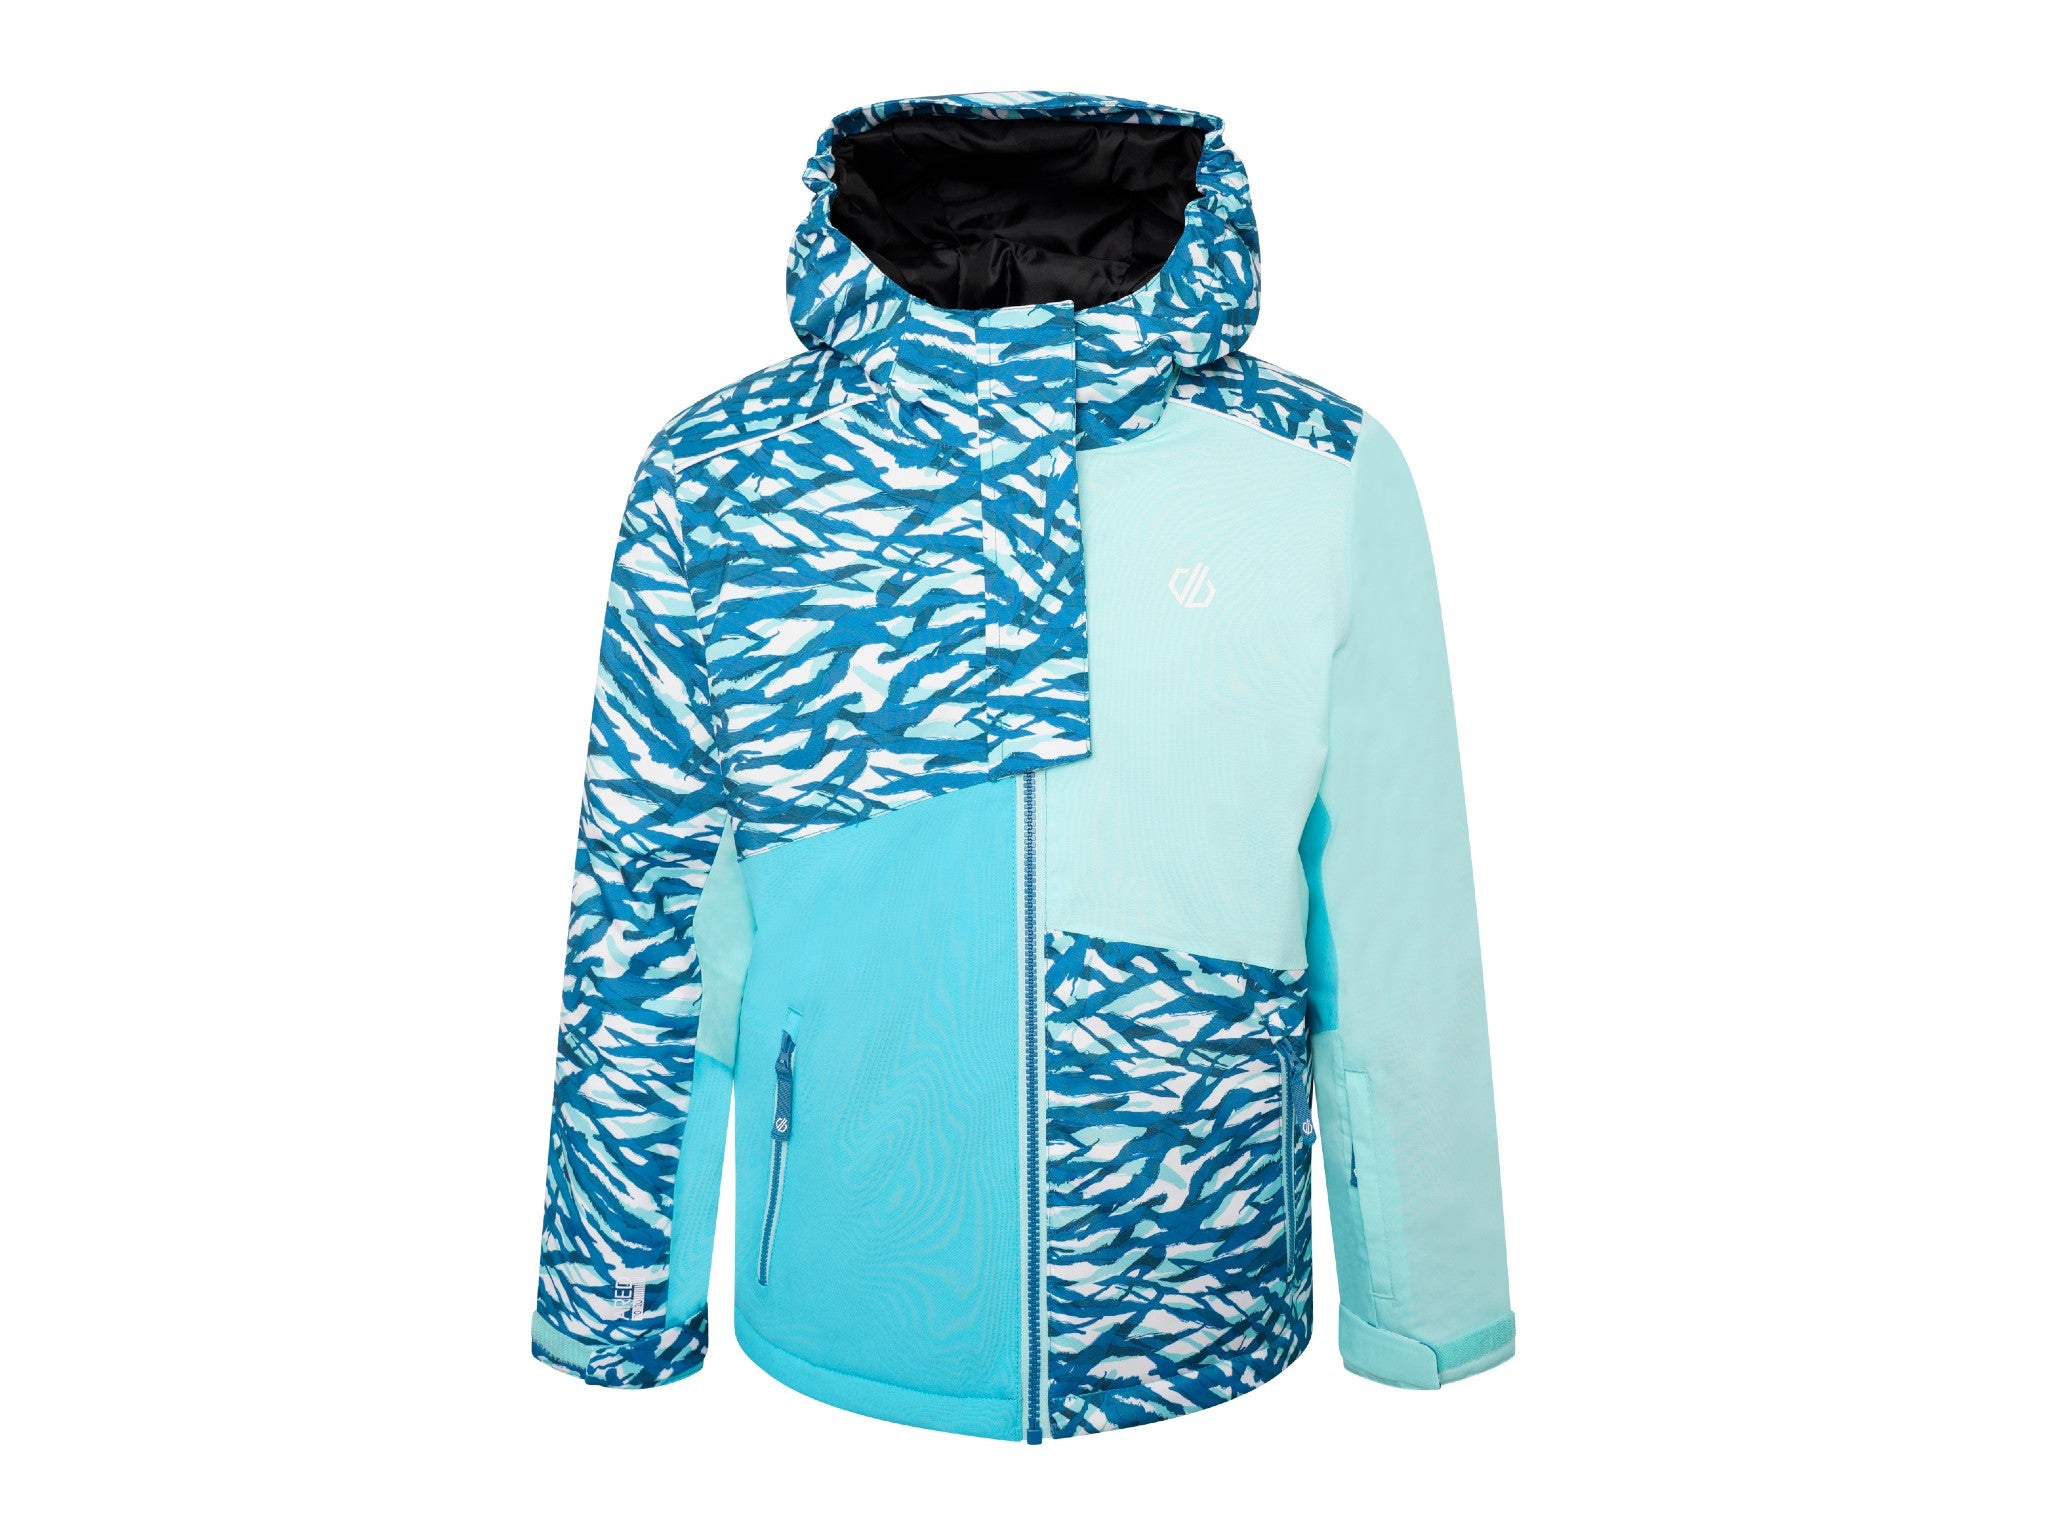 MEN'S DARE2B UPSTANDING CLUB WATERPROOF AND BREATHABLE SKI AND WINTER JACKET. 